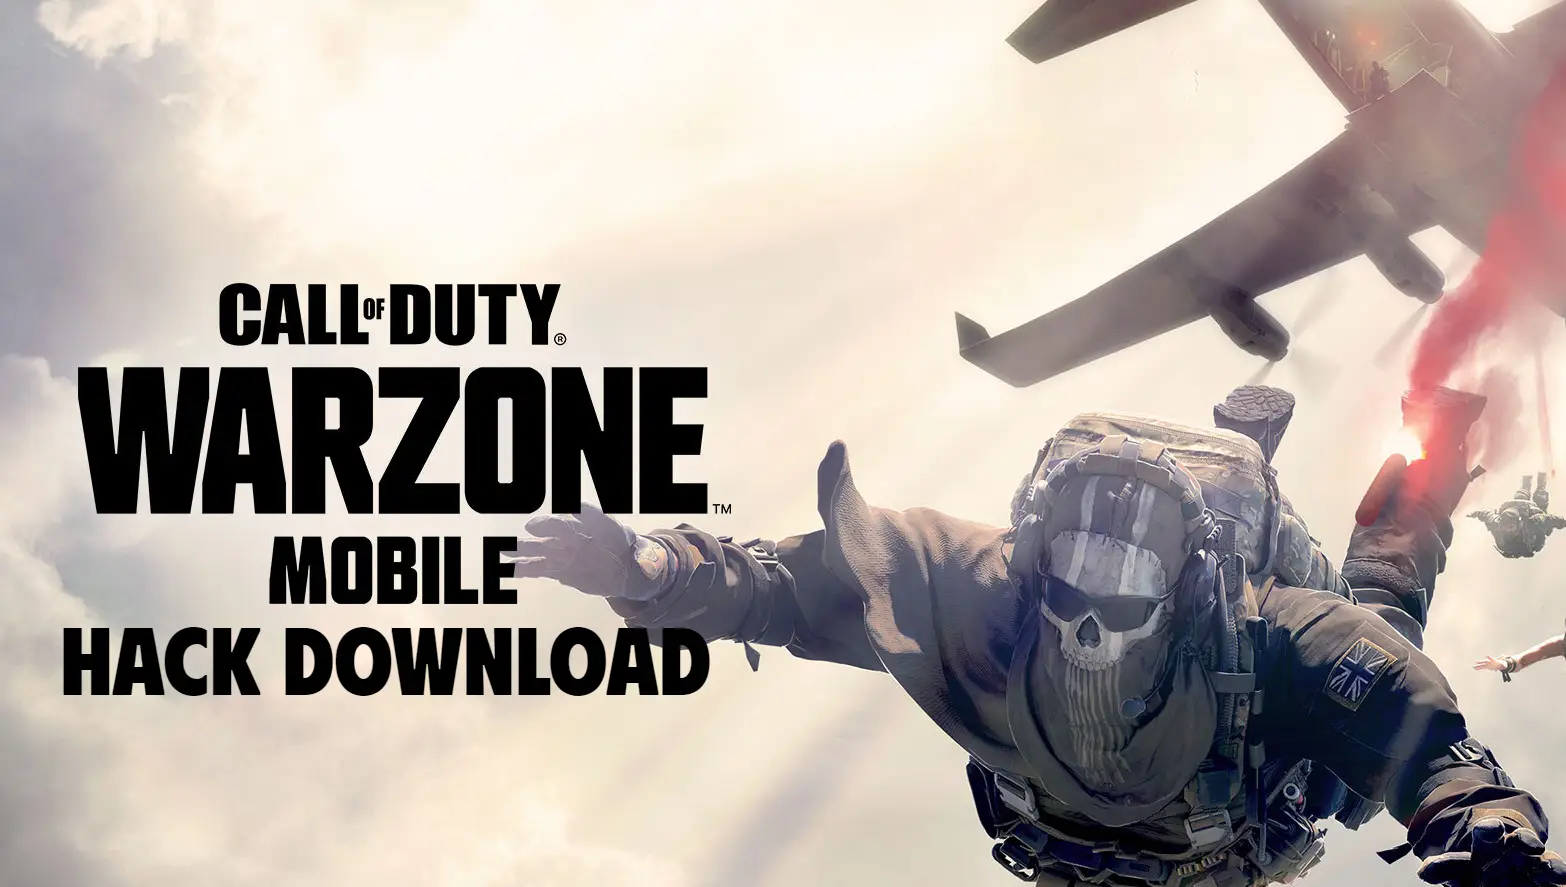 call of duty war zone mobile hack